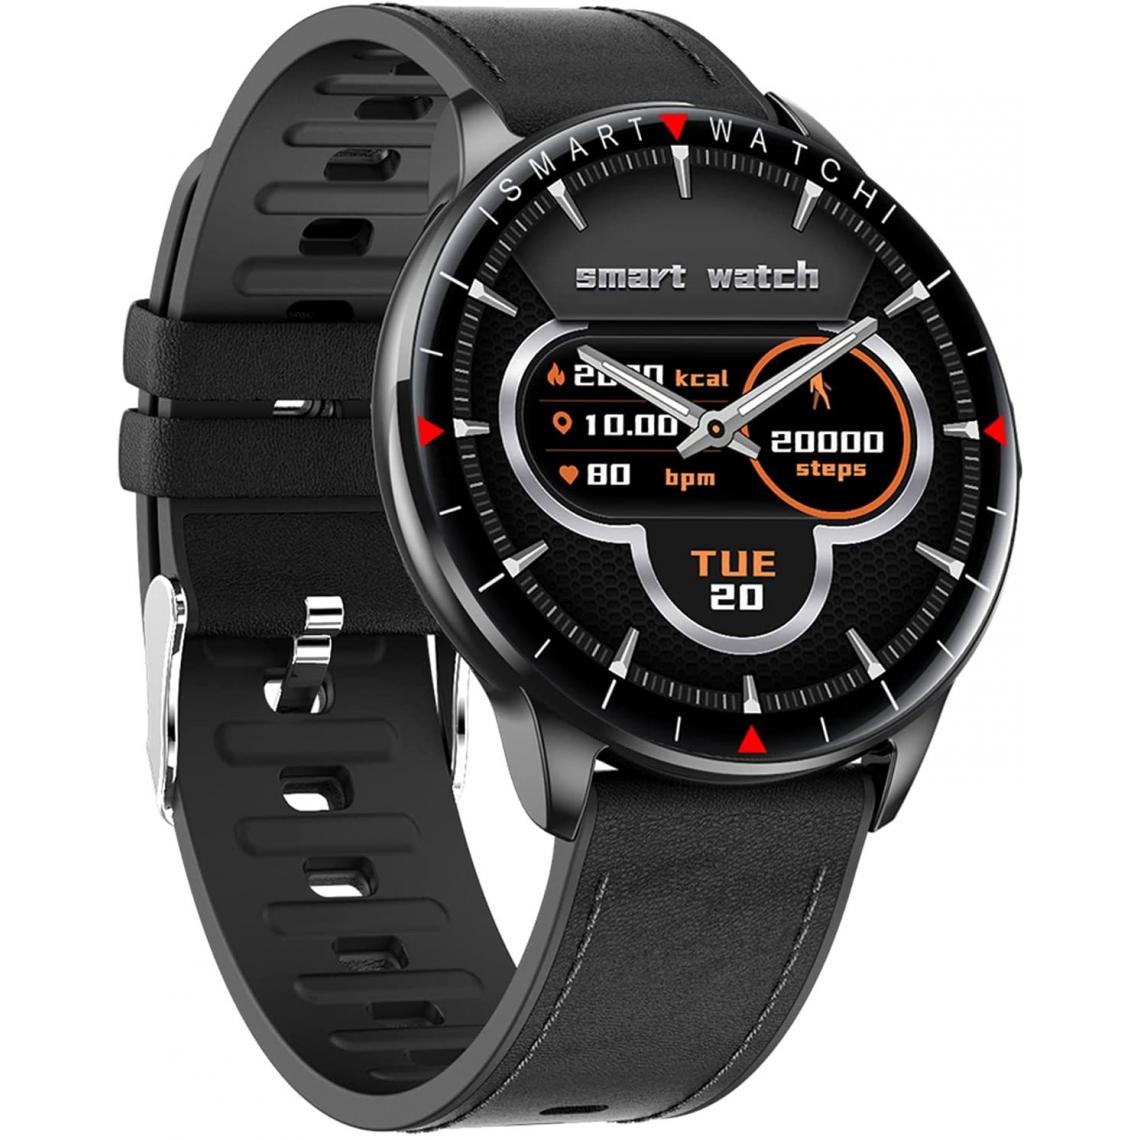 Chronotech Montres - Chronus Montre Connectées Fitness Tracker Pedometer Calories Wrist Waterproof IP68 Smart Watch With Stopwatch Notifications Messages For Android iOS(black) - Montre connectée